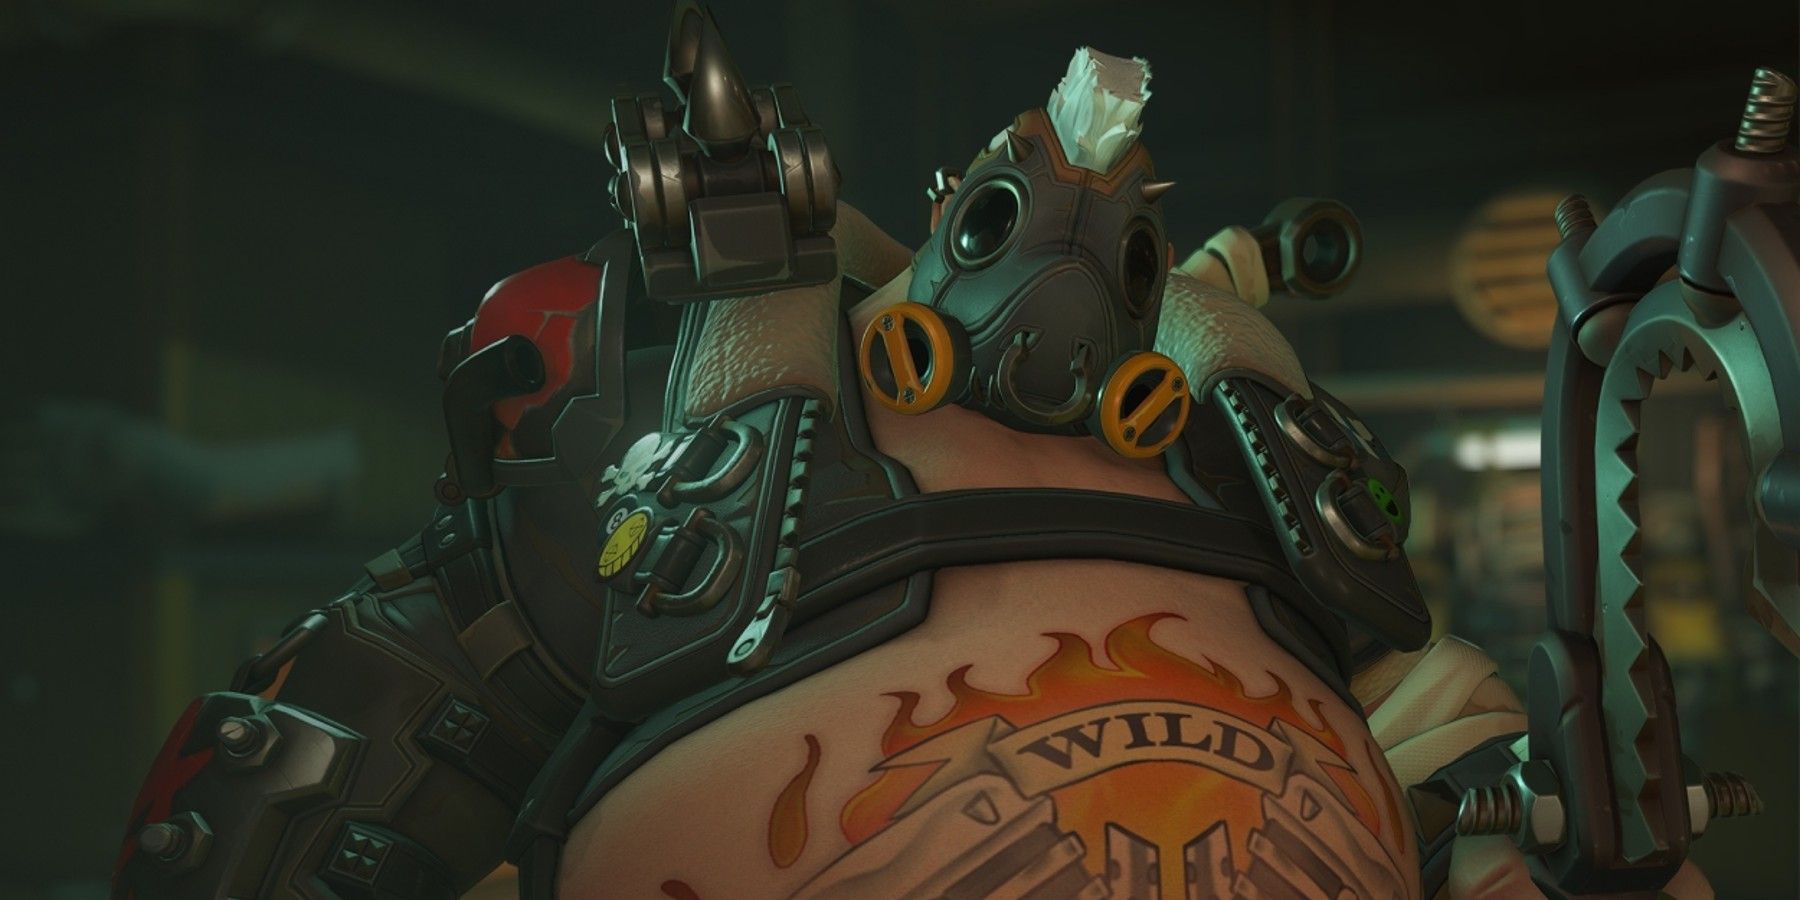 Funny Overwatch 2 Clip Shows Roadhog 'Flying' Back to the Spawn Room